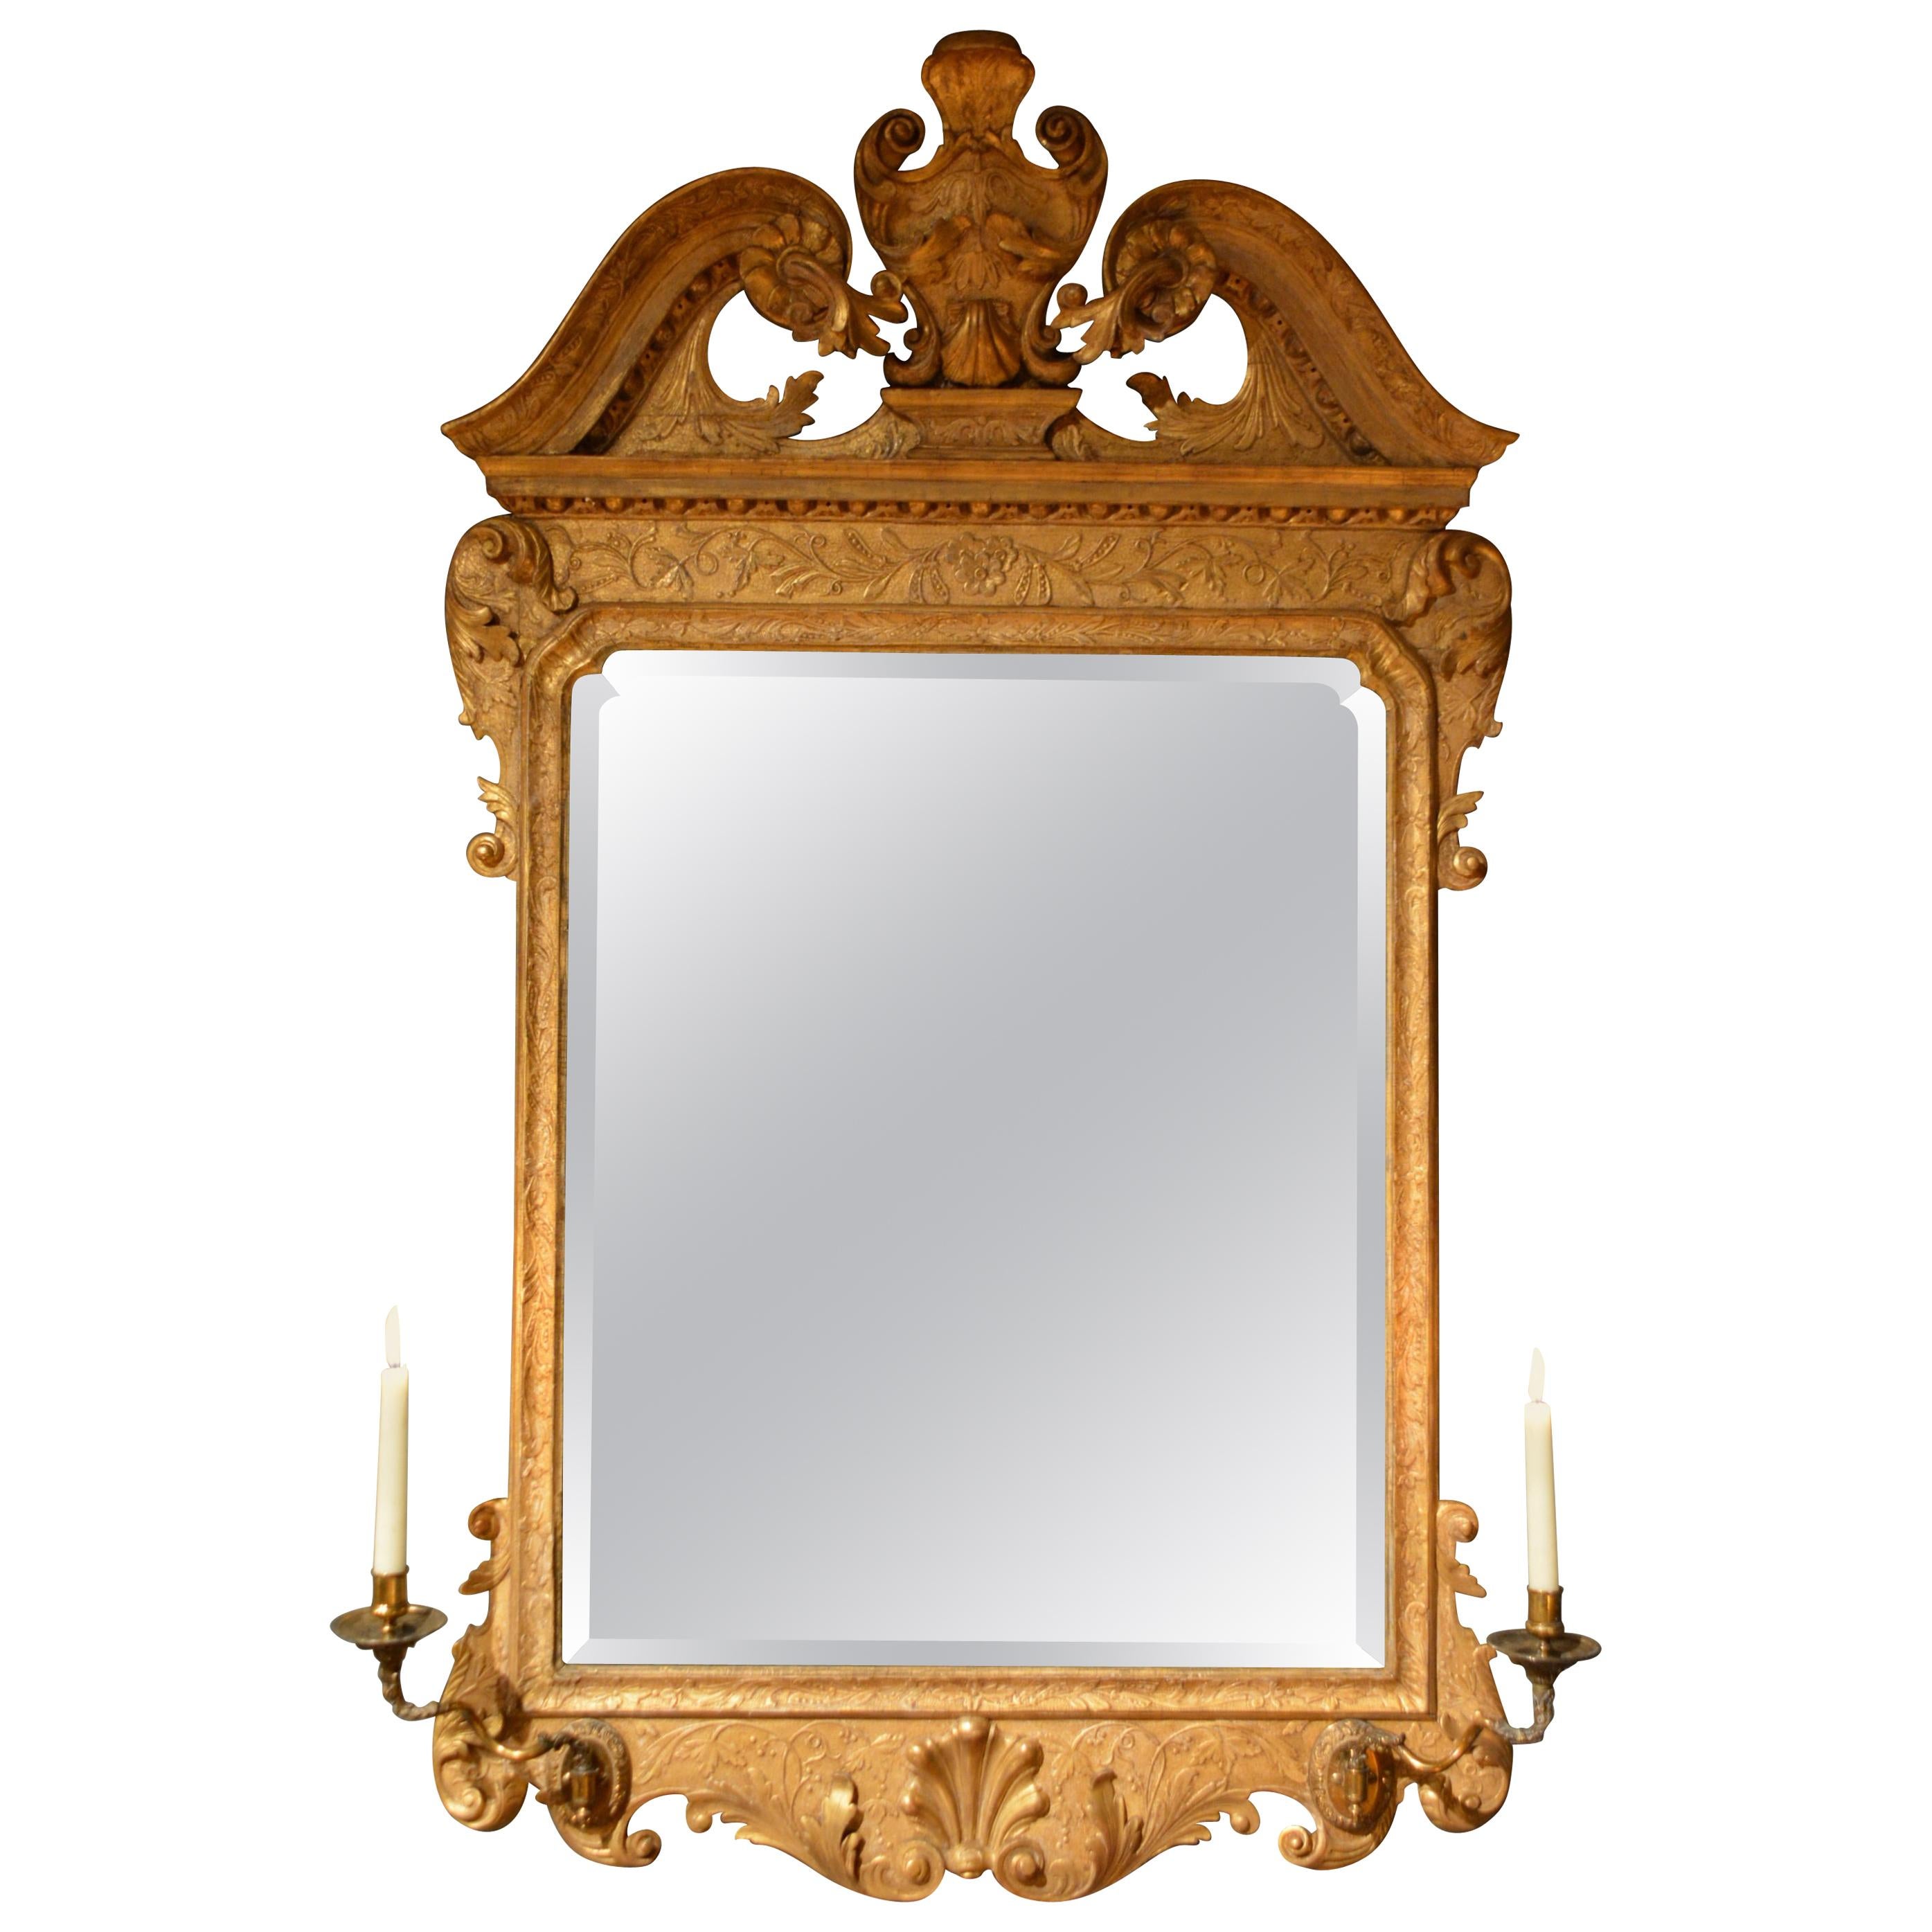 18th Century Carved Giltwood Gesso Mirror with Candle Sconces For Sale